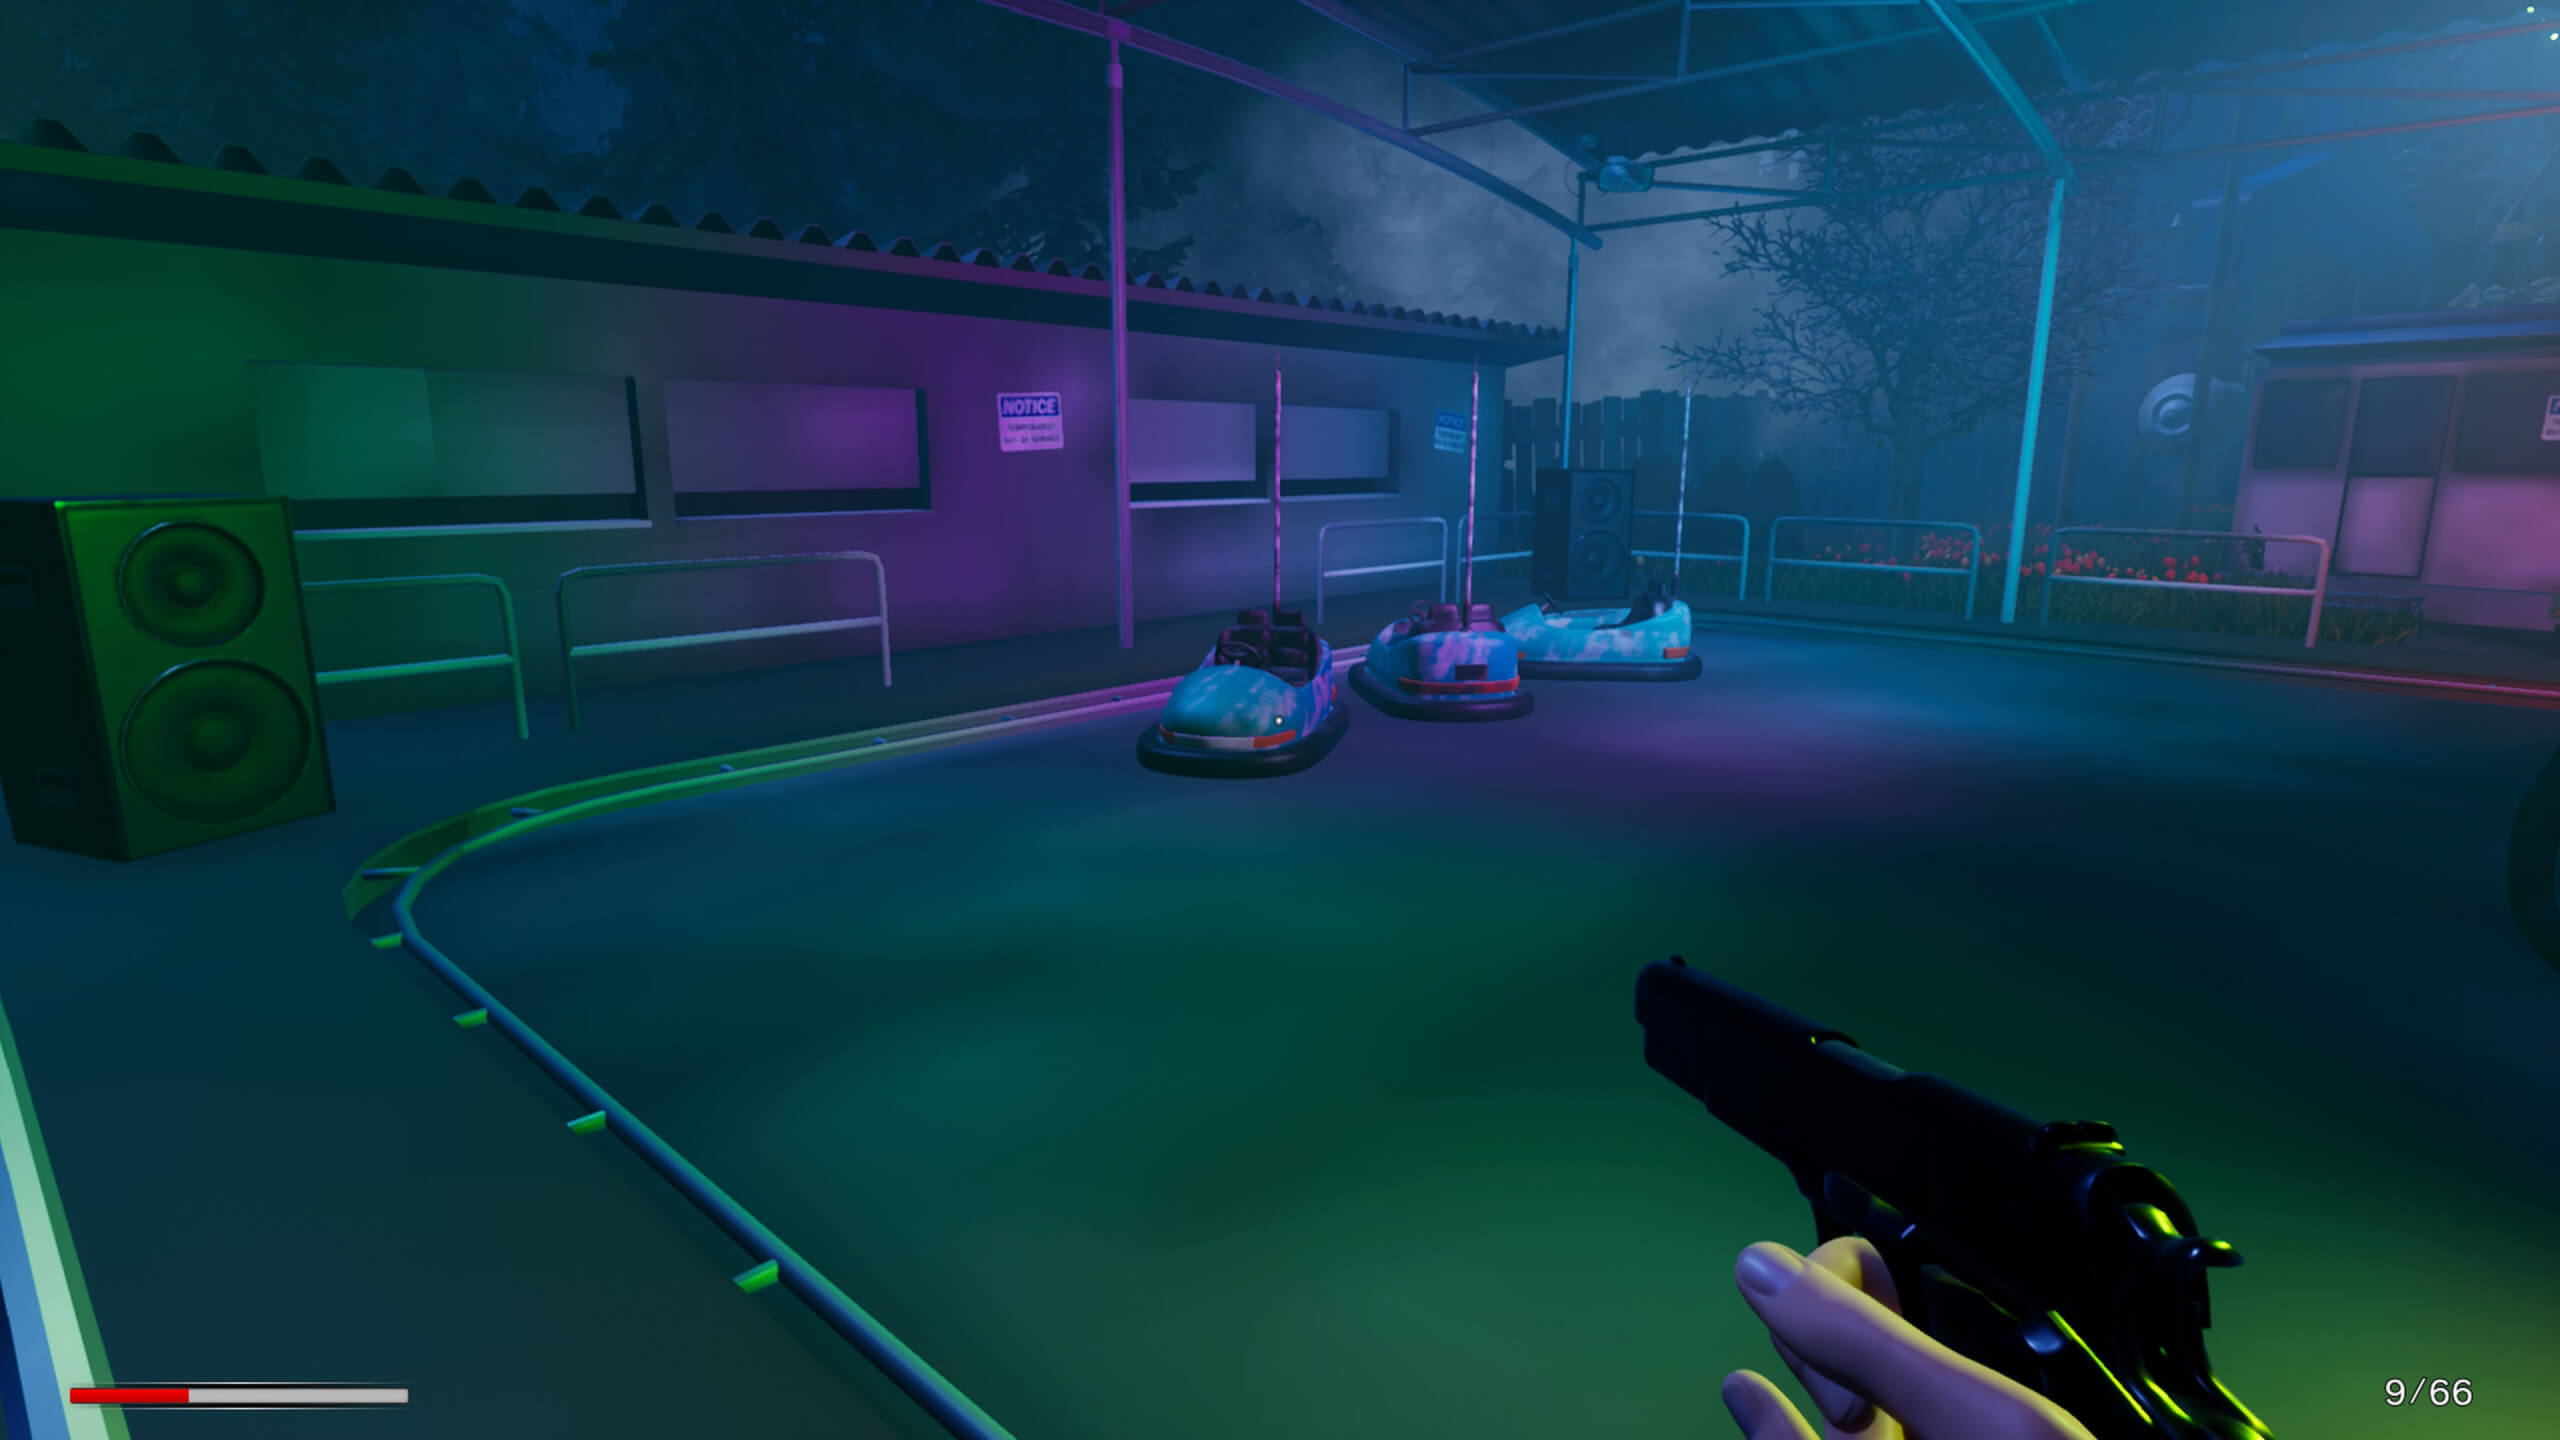 A screenshot of a bumper cars area at the fair. I am holding my pistol while looking at the environment. 